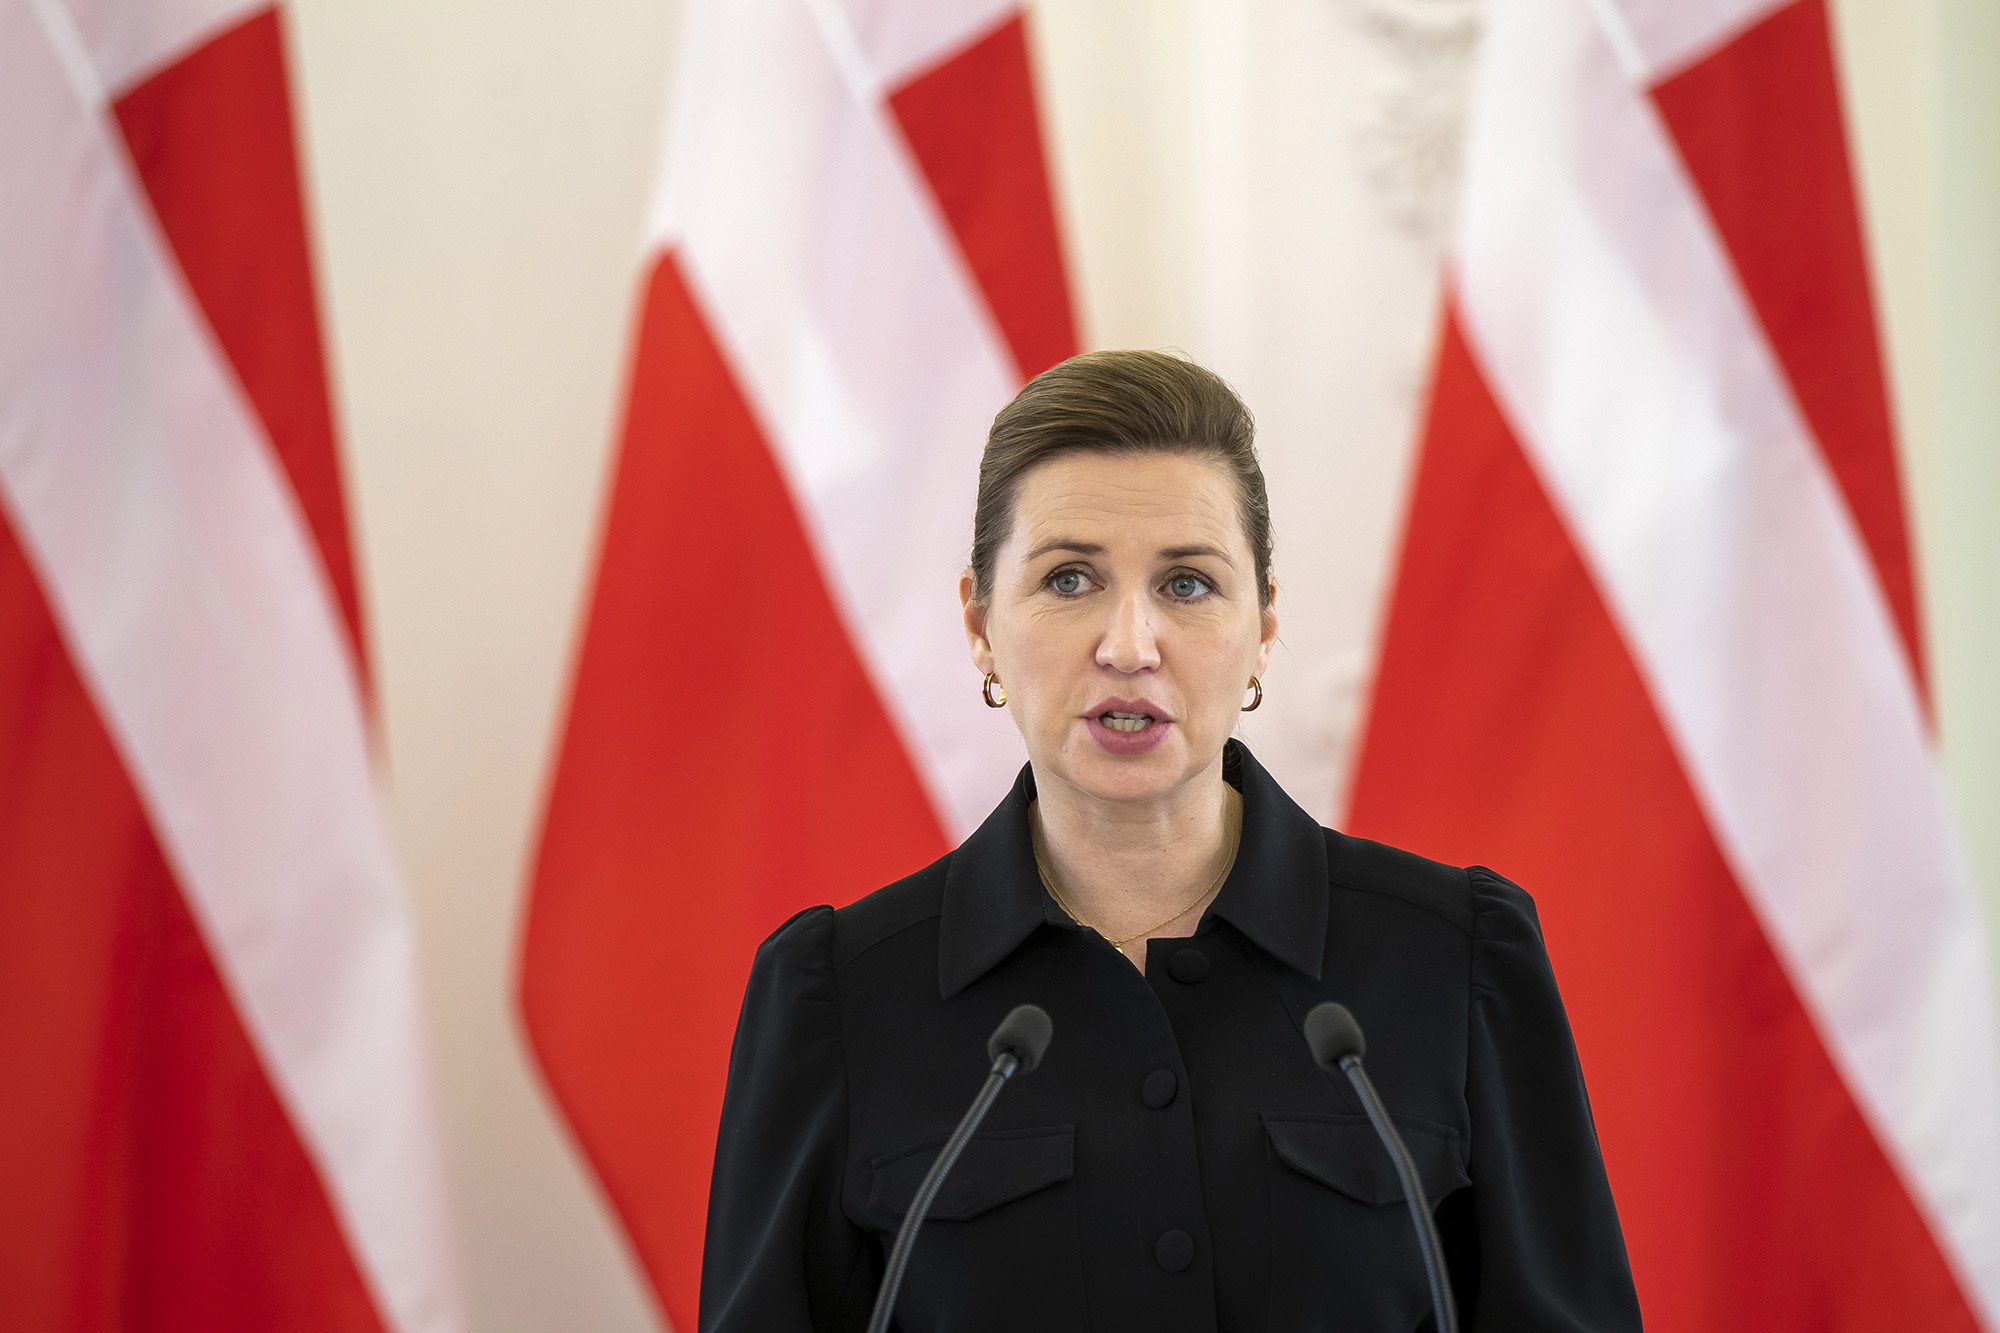 Denmark's Prime Minister Mette Frederiksen speaks during a joint media conference with Lithuanian President Gitanas Nauseda at the President's palace in Vilnius, Lithuania, on March 31.